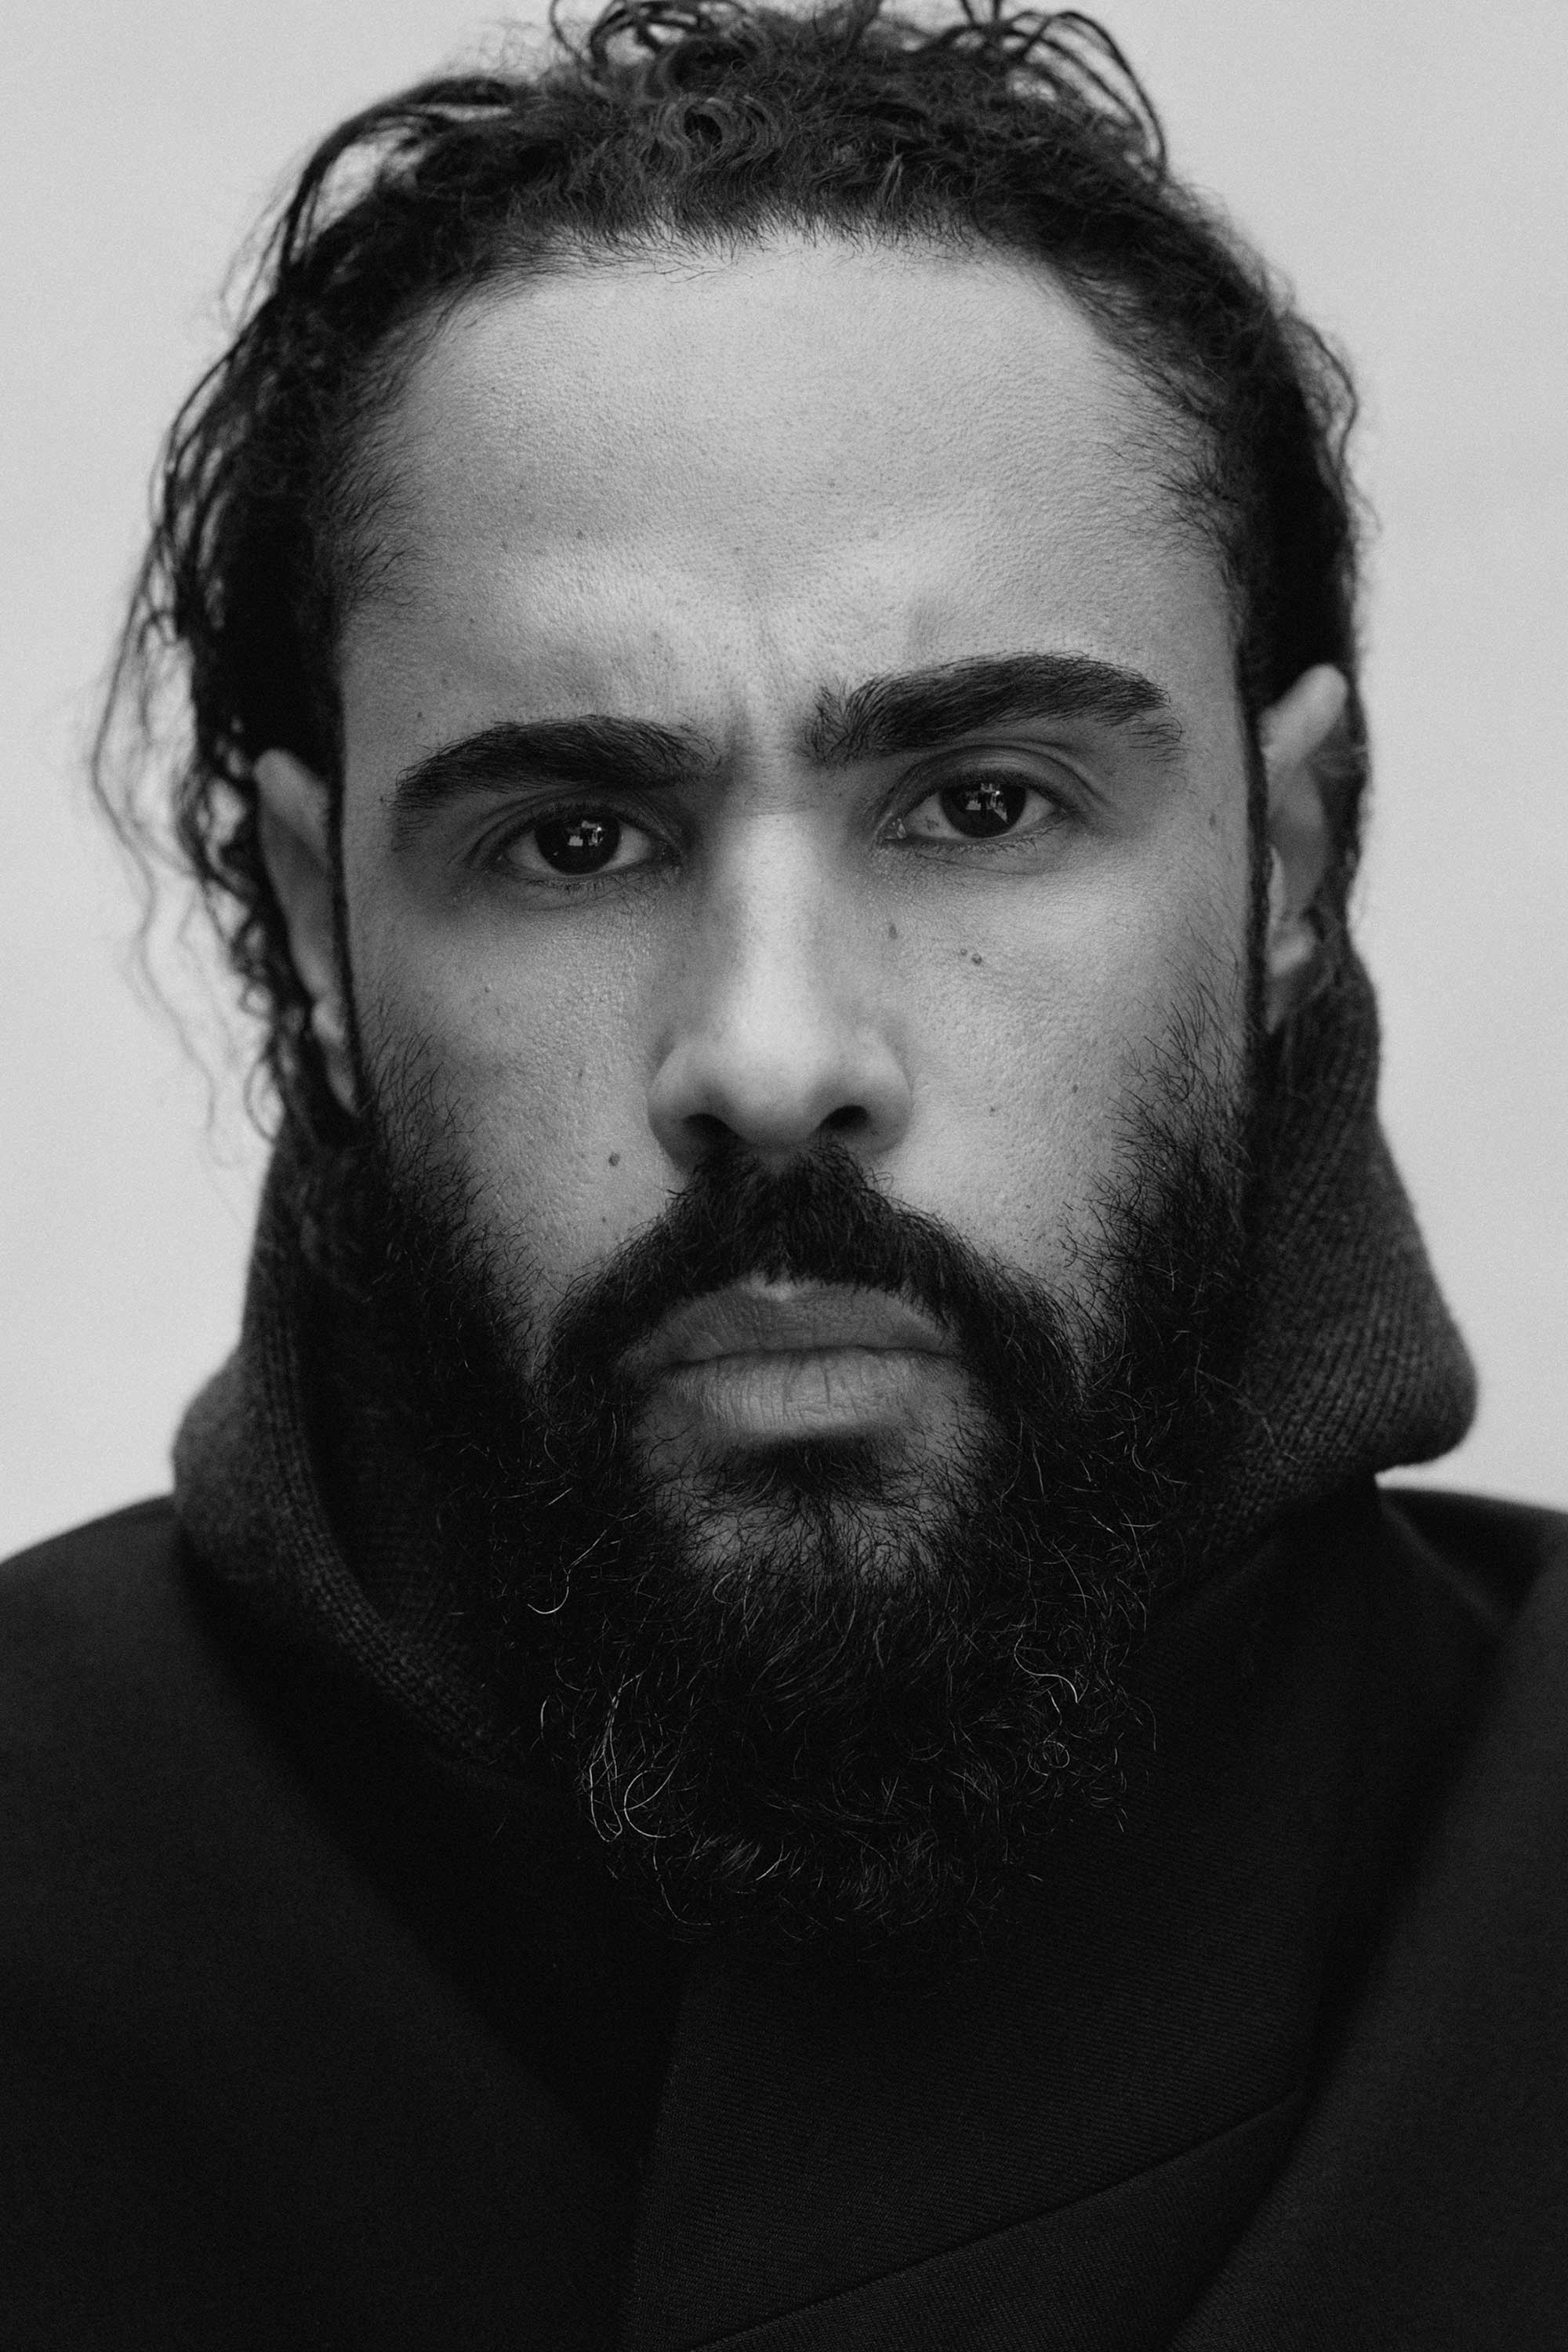 Fear of God could grow to $1bn. For Jerry Lorenzo, that’s not the goal